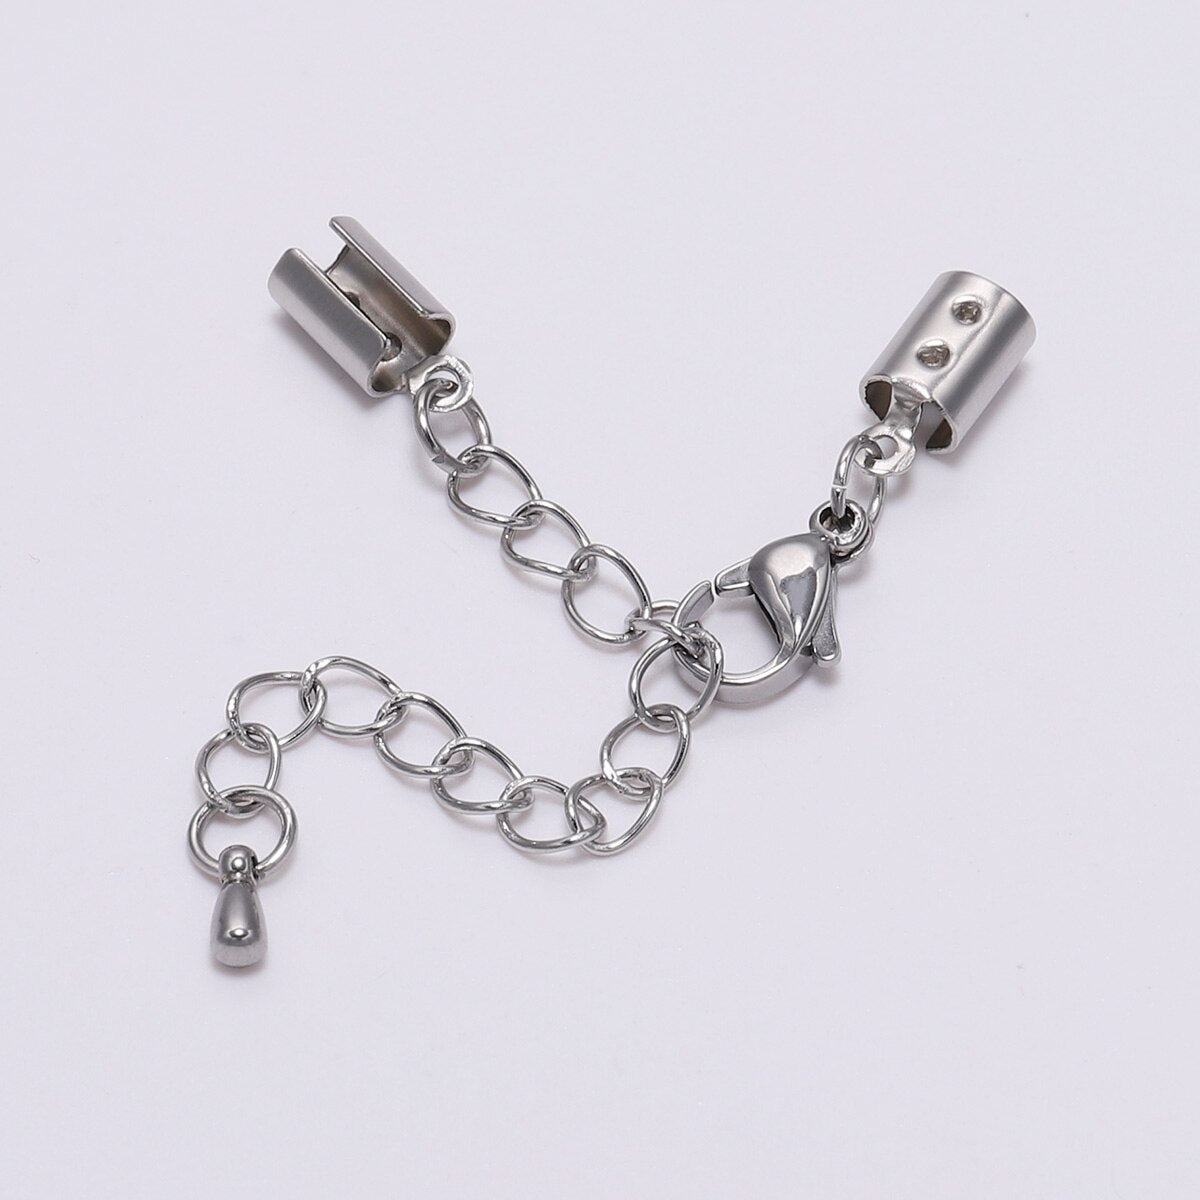 Stainless Steel Cord Clips Set, 5pcs